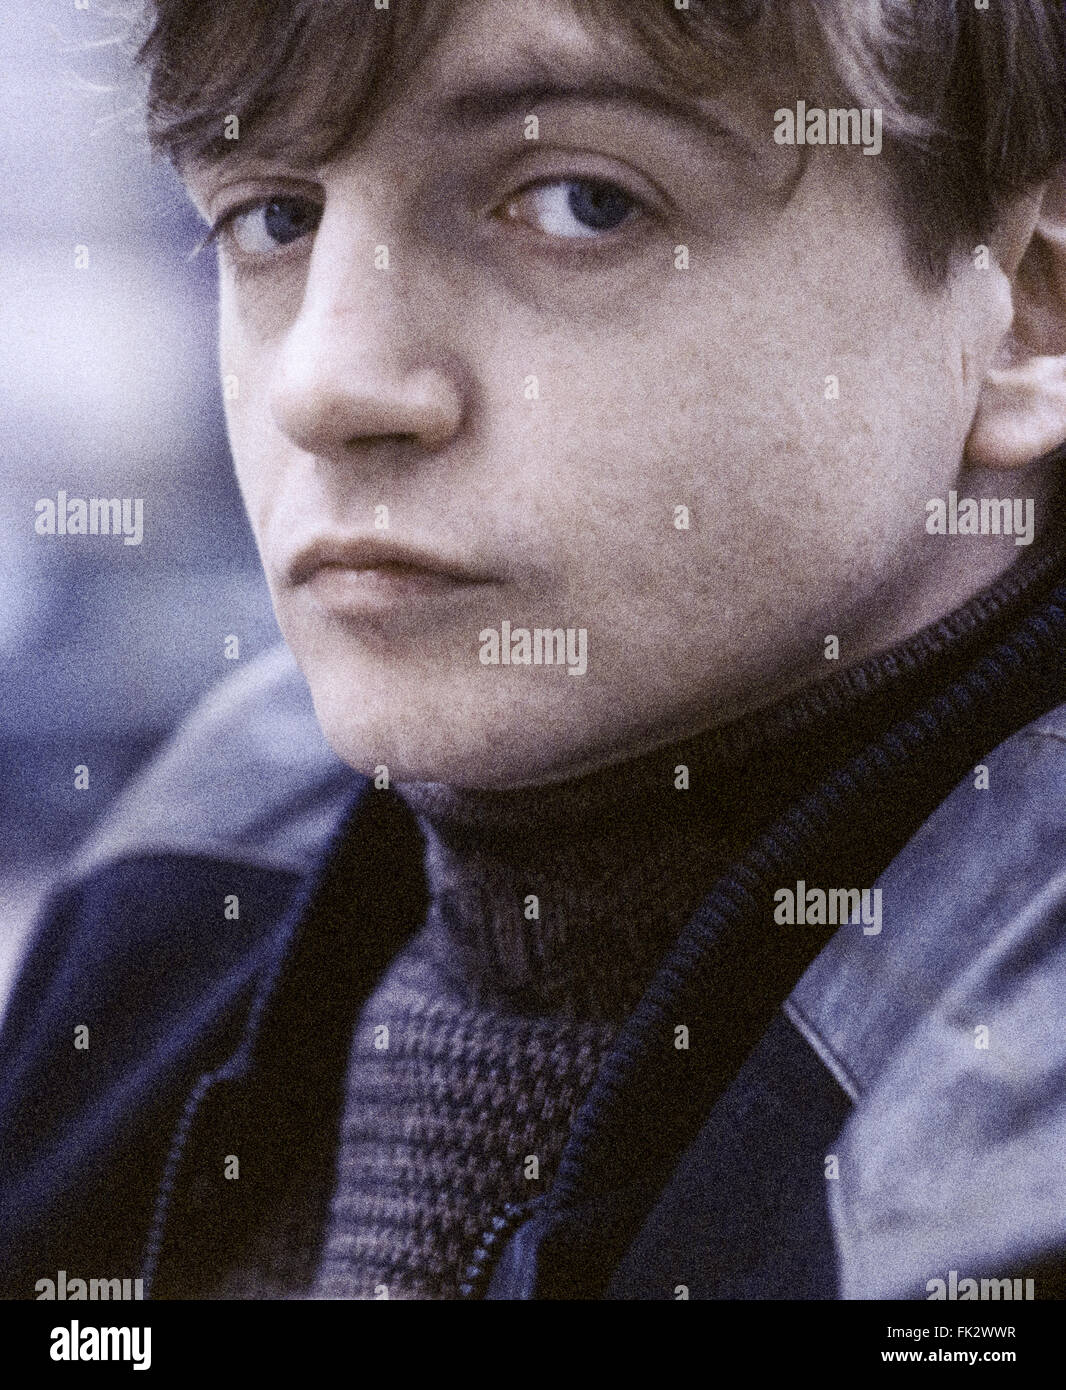 Mark E Smith, punk rocker, singer with the Fall photographed outside the Victoria and Albert museum in South Kensington, London, in the early 1990s. Scan from Agfa 1000RS slide film. Stock Photo